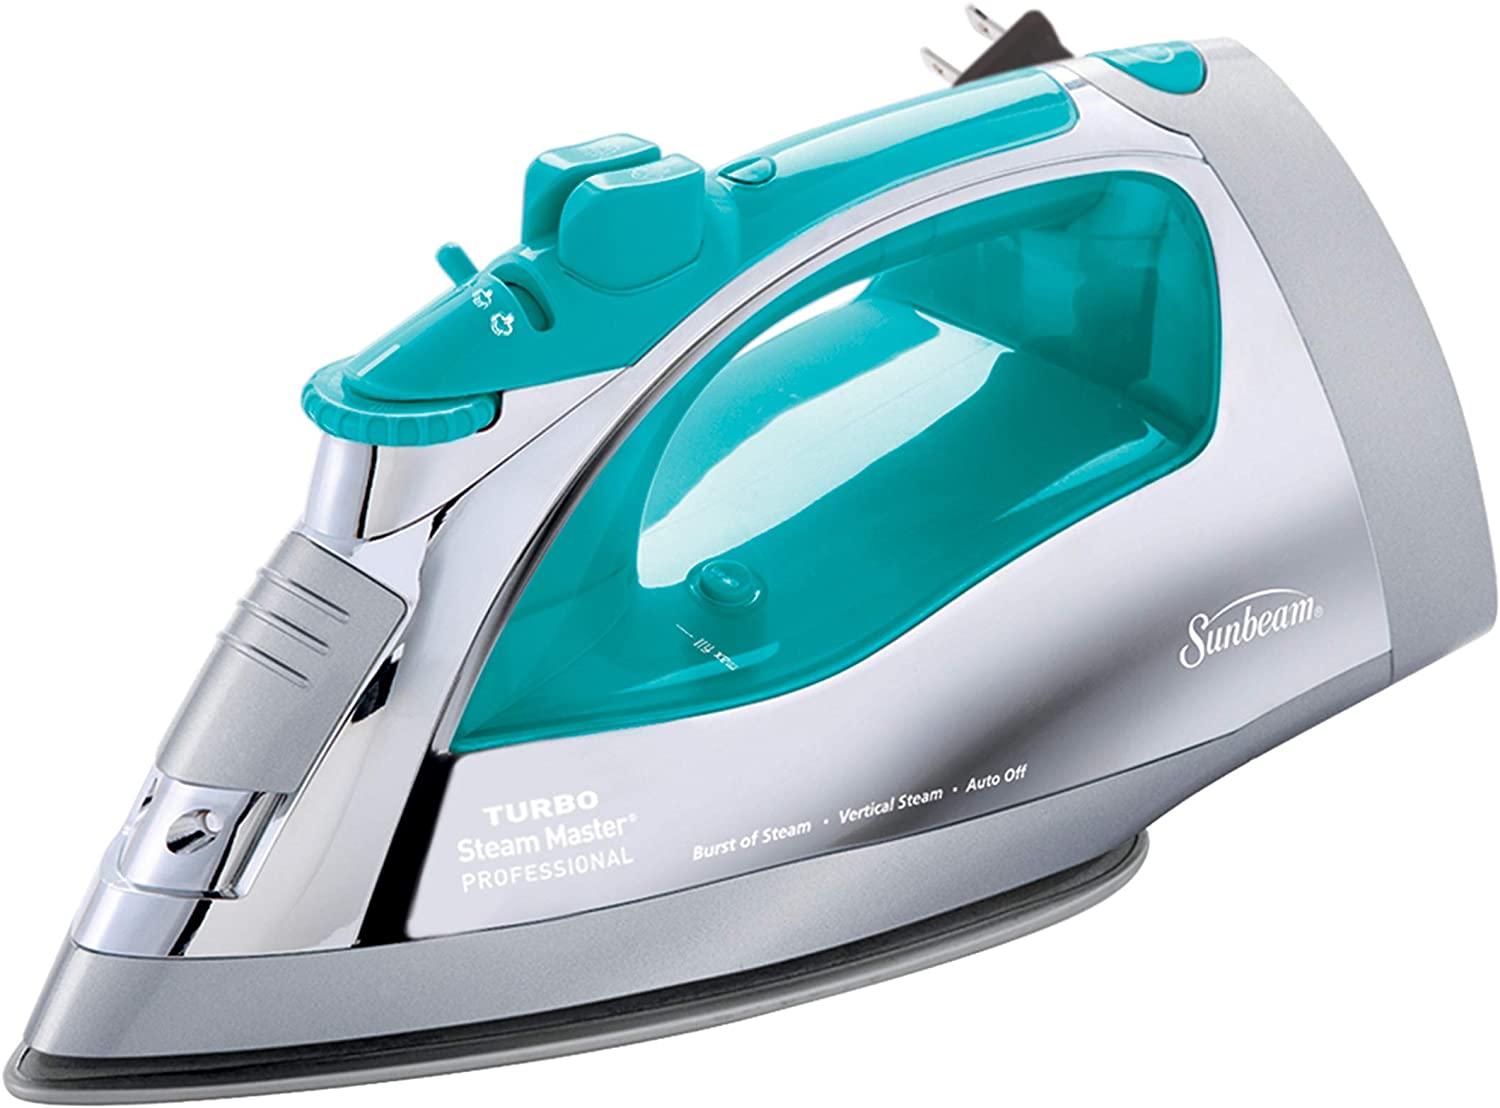 Sunbeam Steamaster Iron with Retractable Cord for $17.99